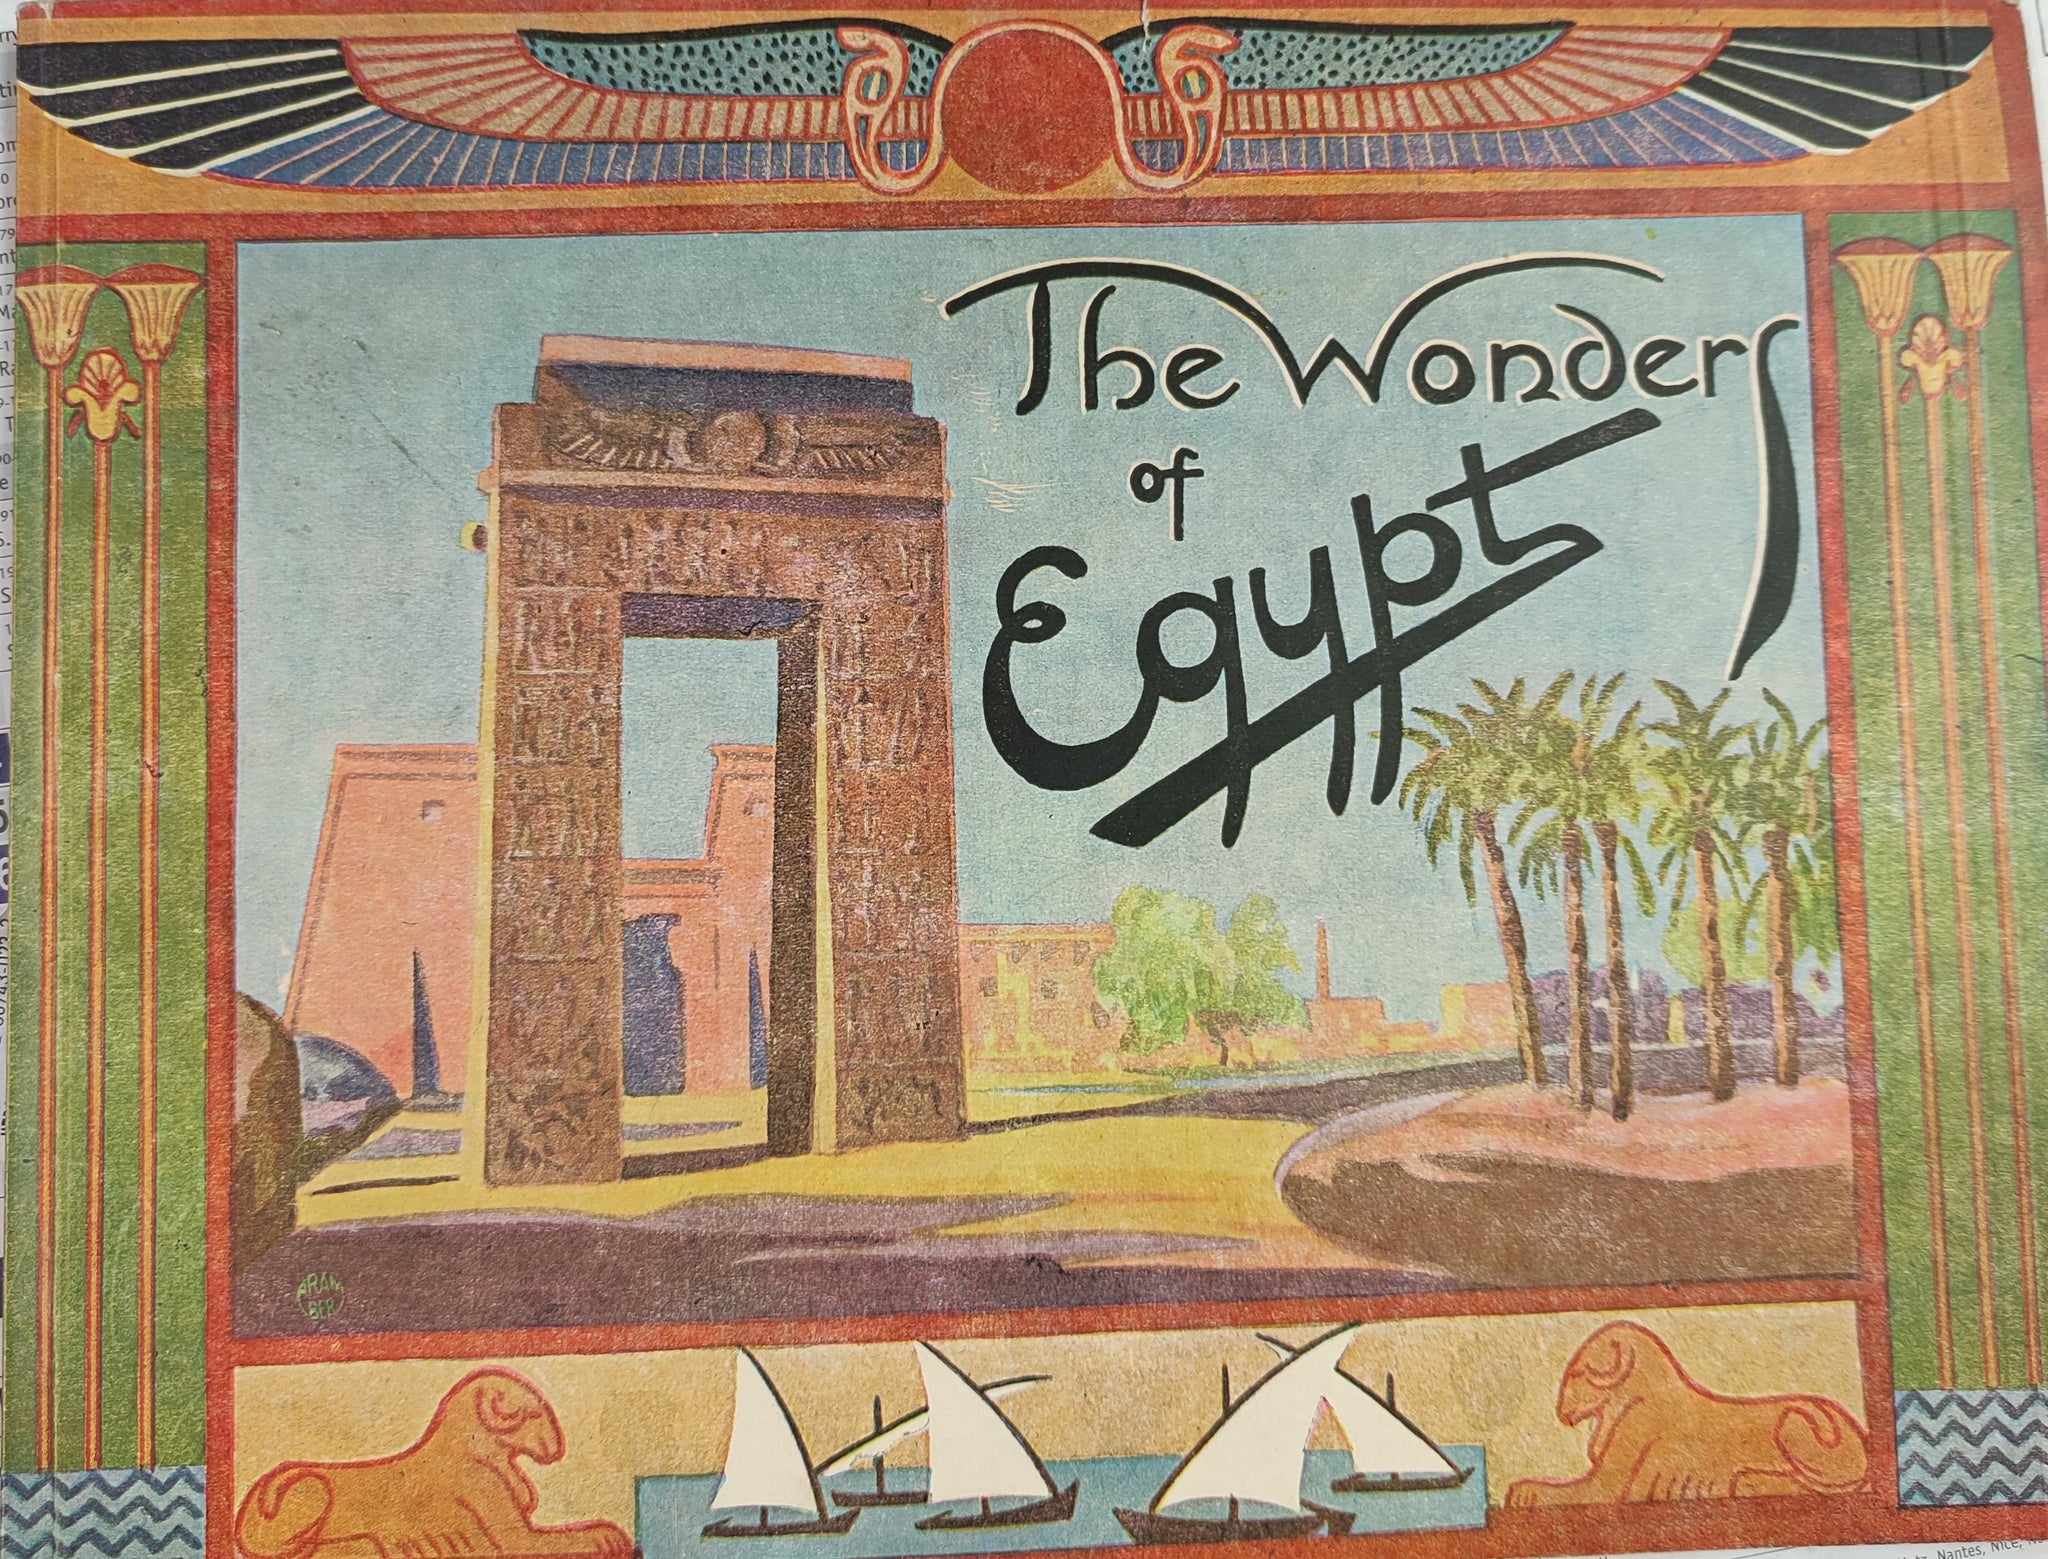 The wonders of Egypt.